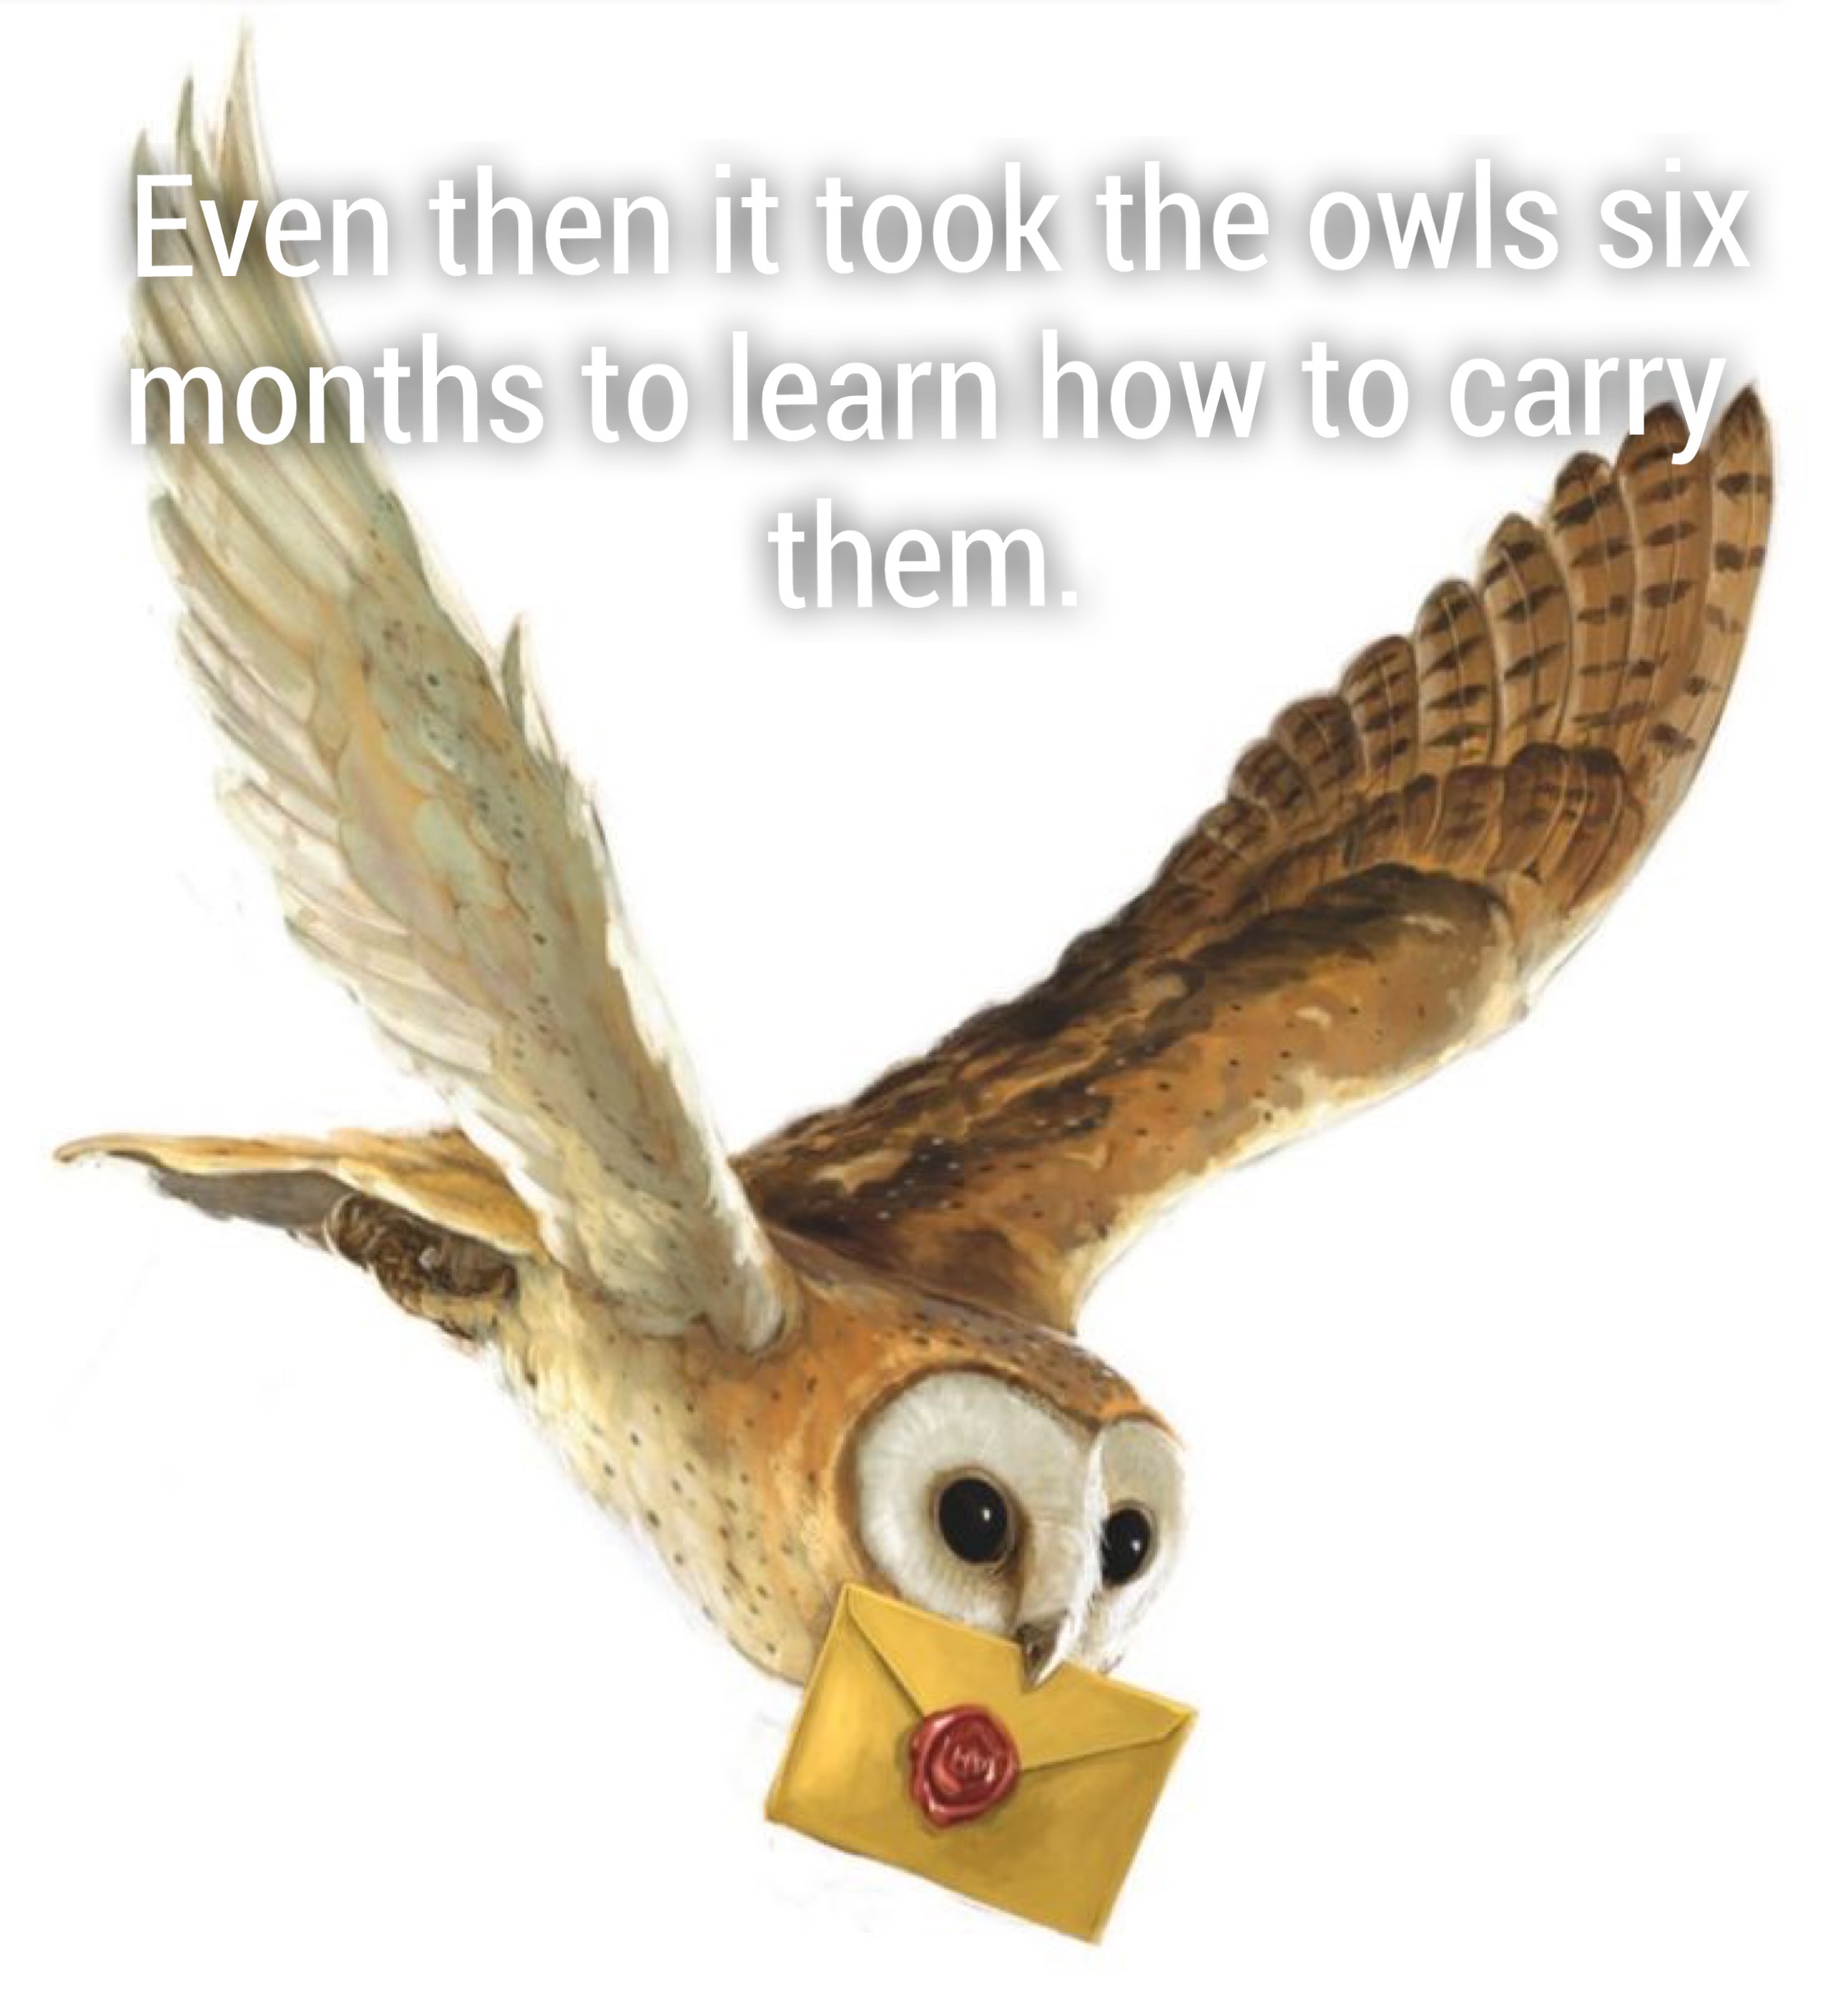 harry potter owl png - Even then it took the owls six months to learn how to carry them